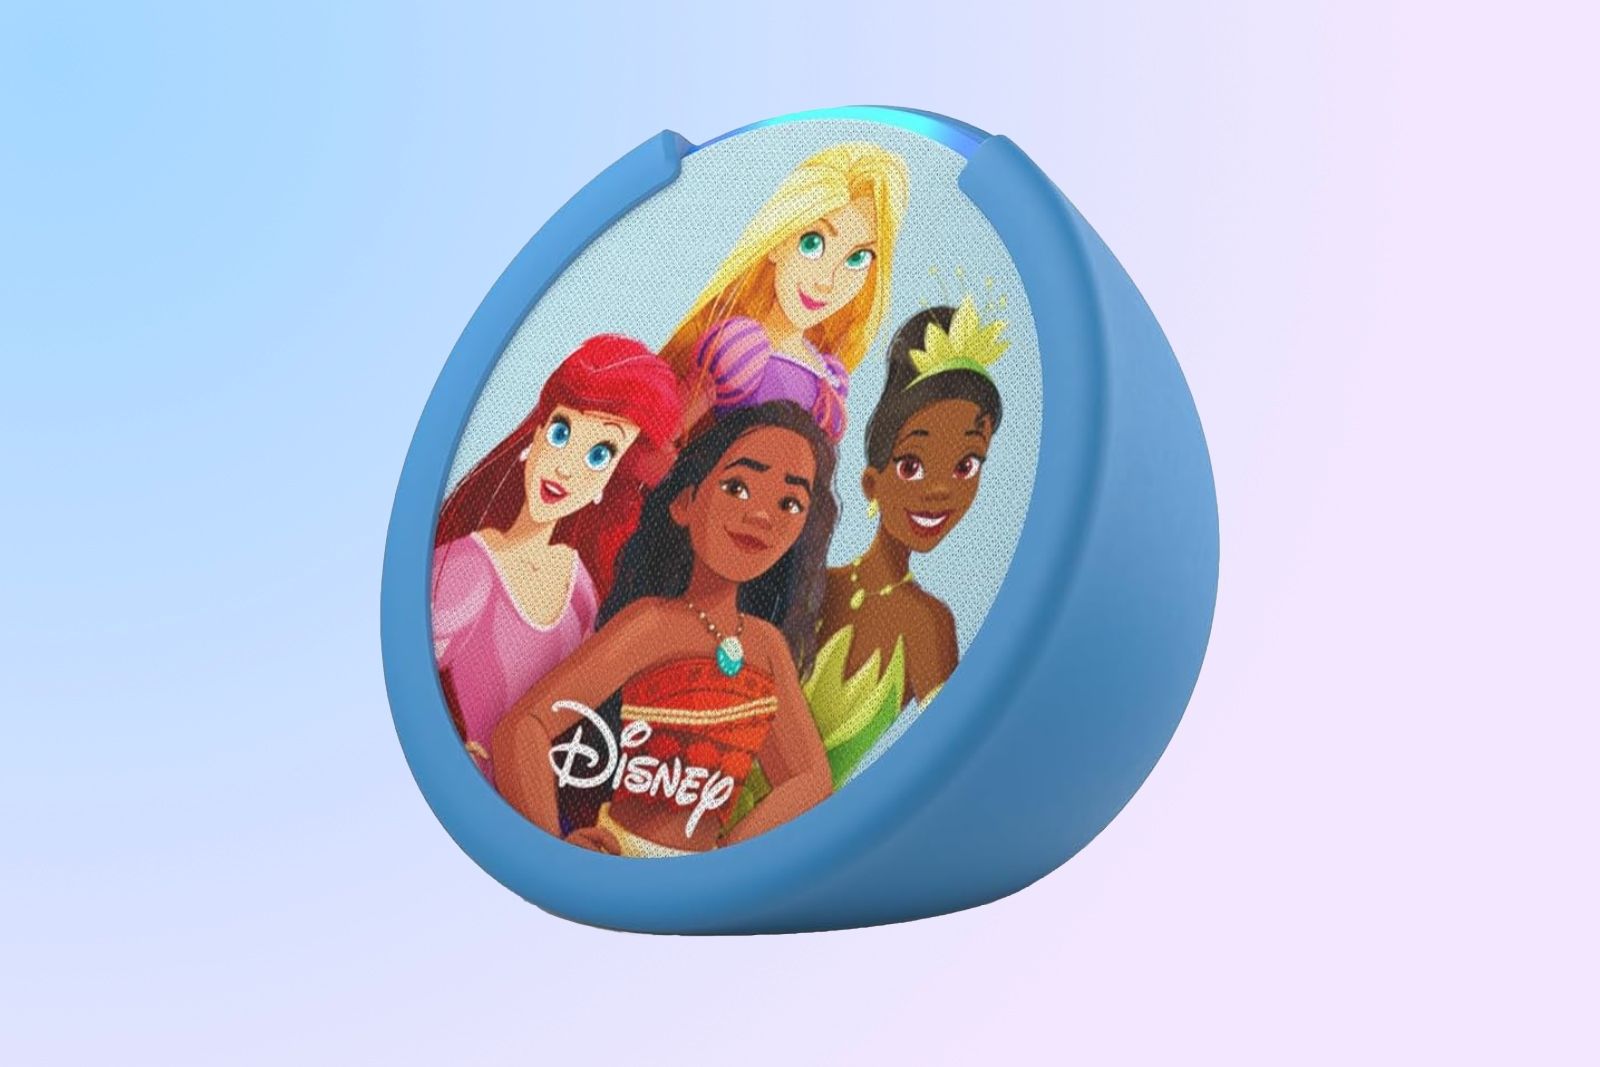 a round speaker with Disney princesses printed on the front and a glowing light on the top.